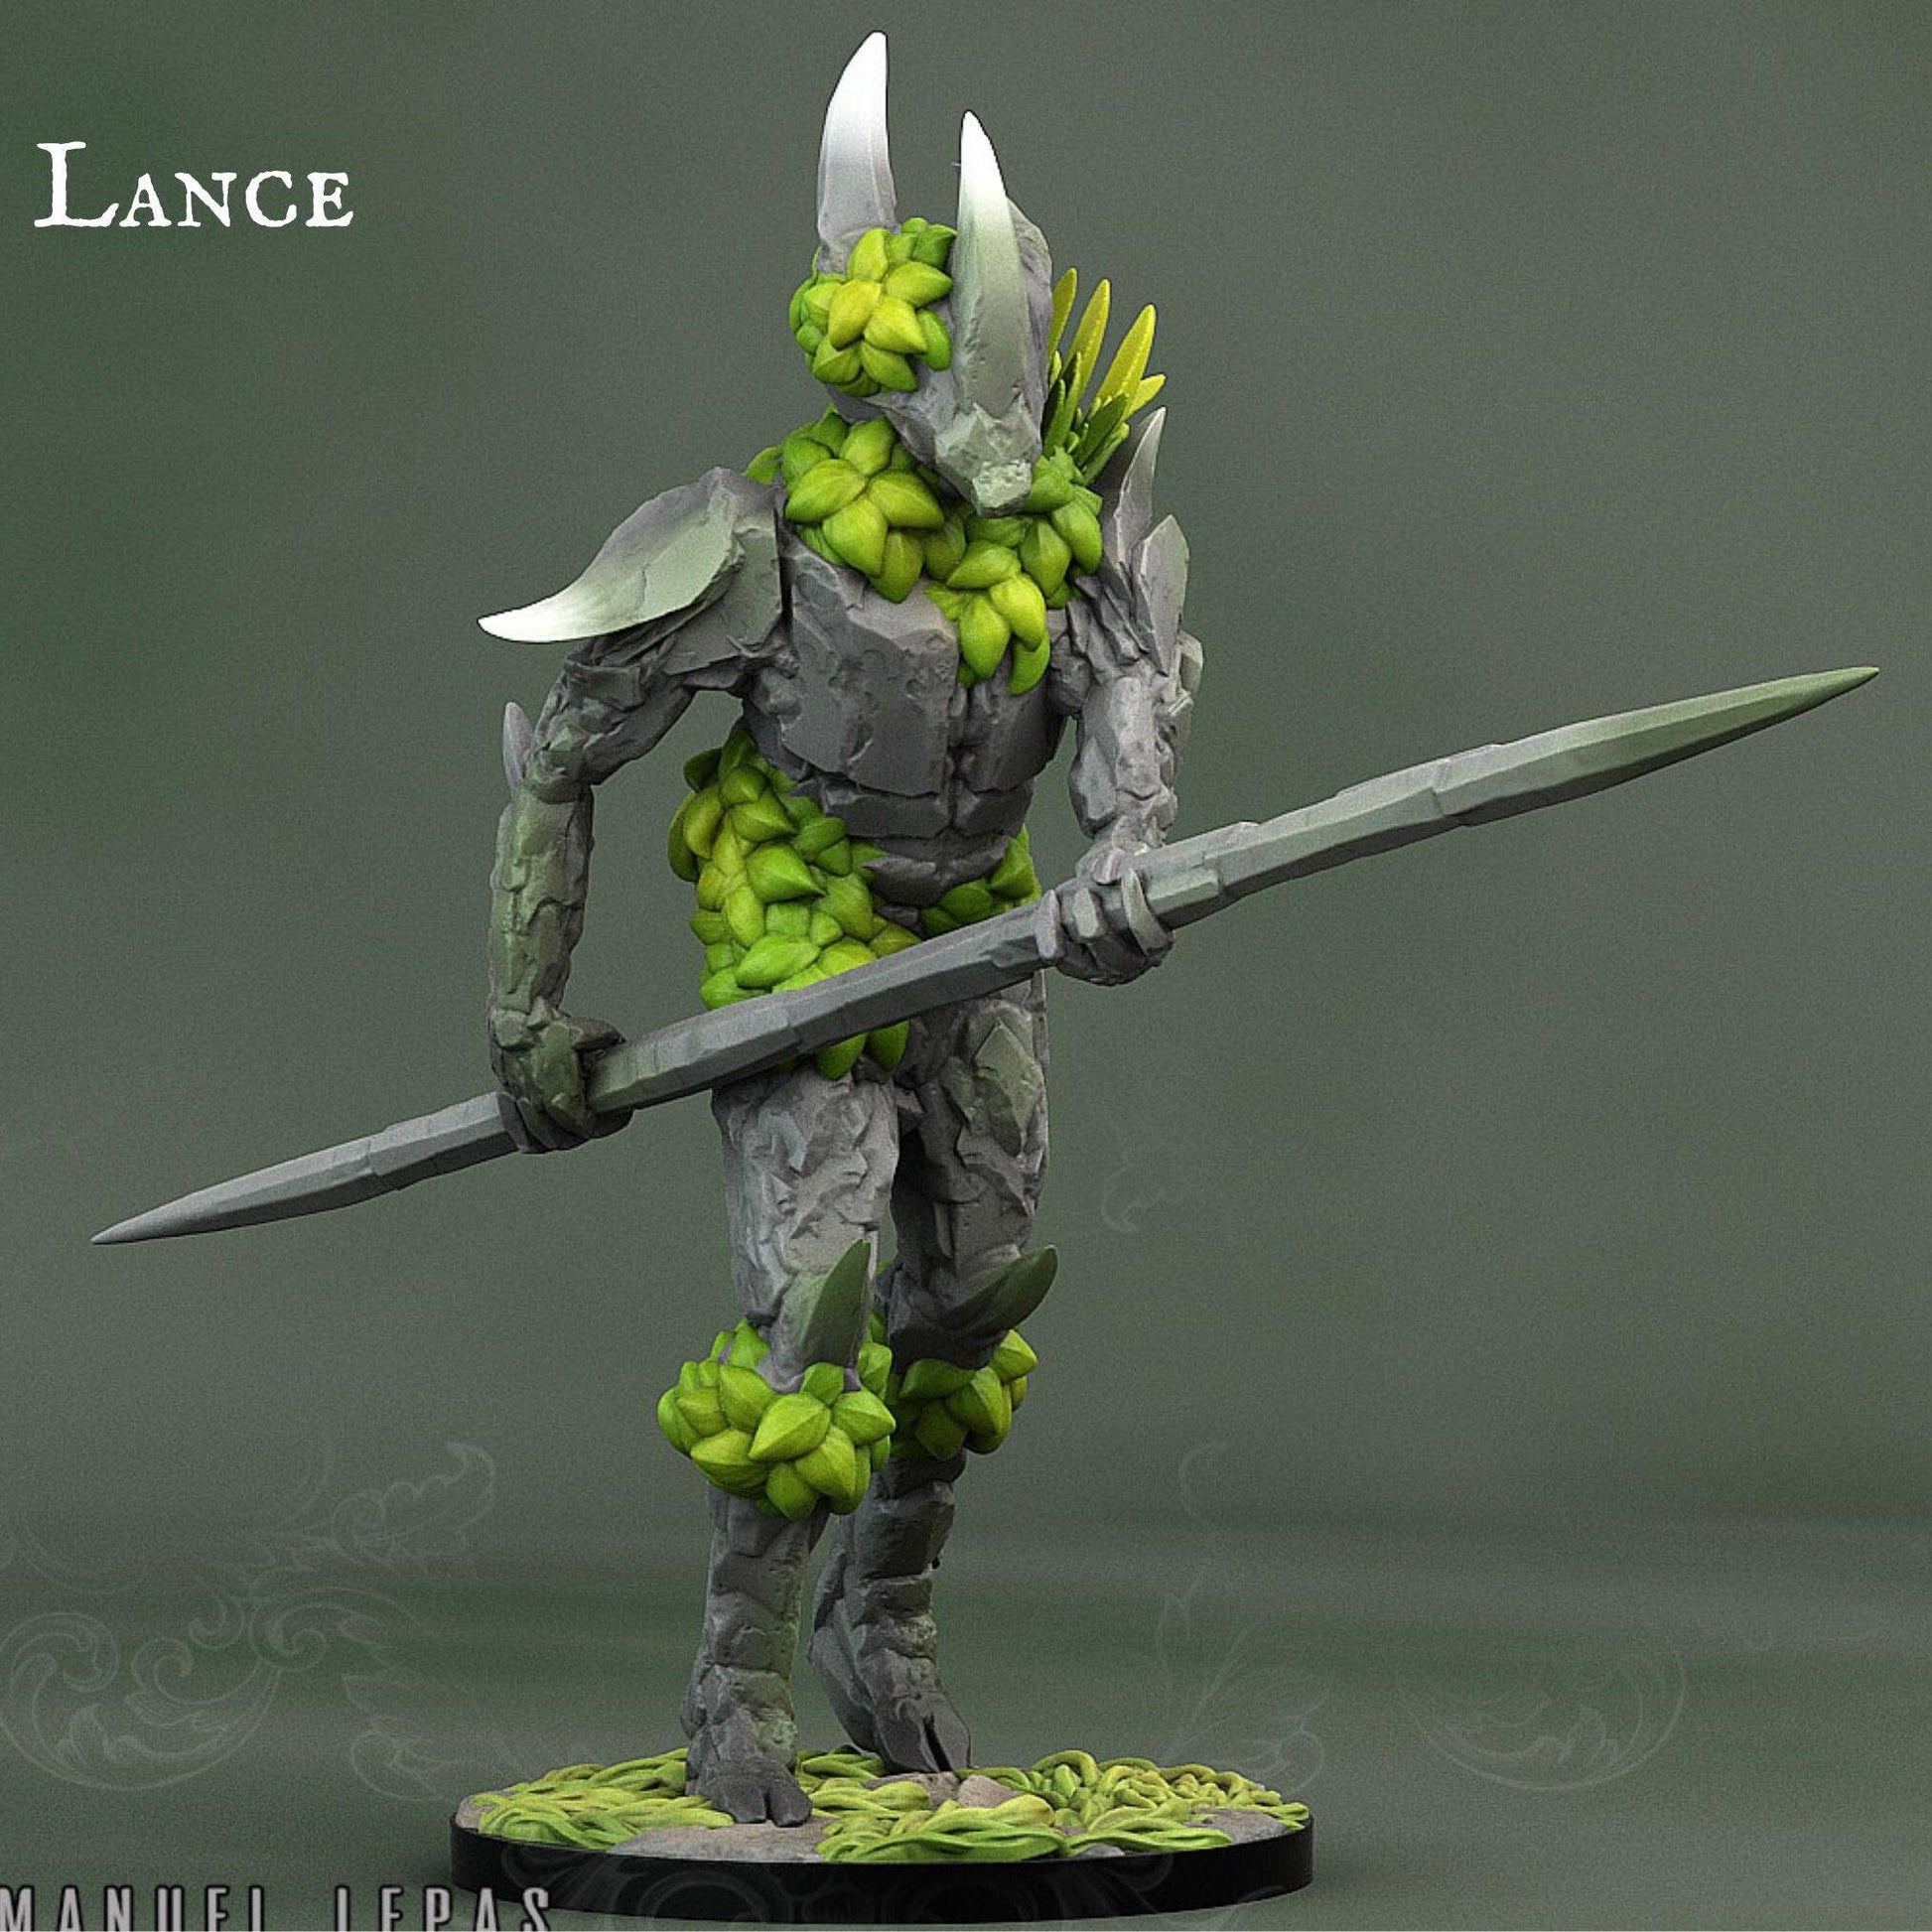 Rock Soldier with Lance Miniature | Print Your Monsters | Tabletop gaming | DnD Miniature | Dungeons and Dragons, DnD Warrior Fighter Monster - Plague Miniatures shop for DnD Miniatures